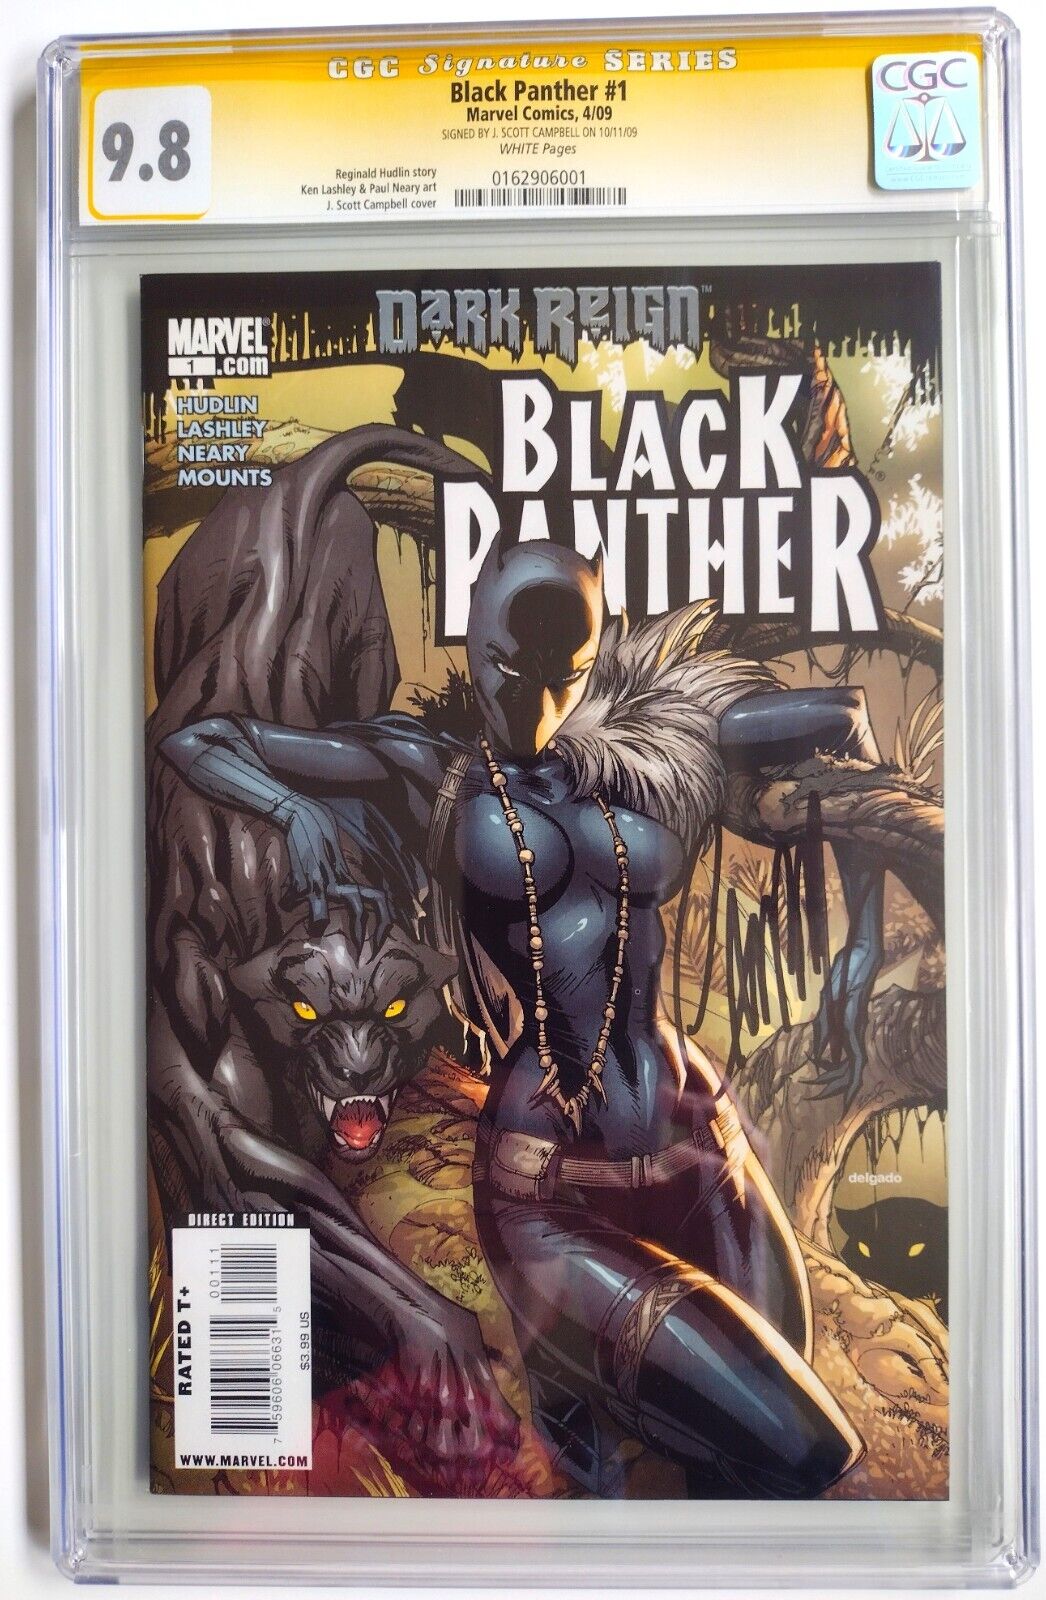 BLACK PANTHER #1 (2009) 1ST PRINT SHURI COVER CGC SS 9.8 SIGNED J SCOTT CAMPBELL